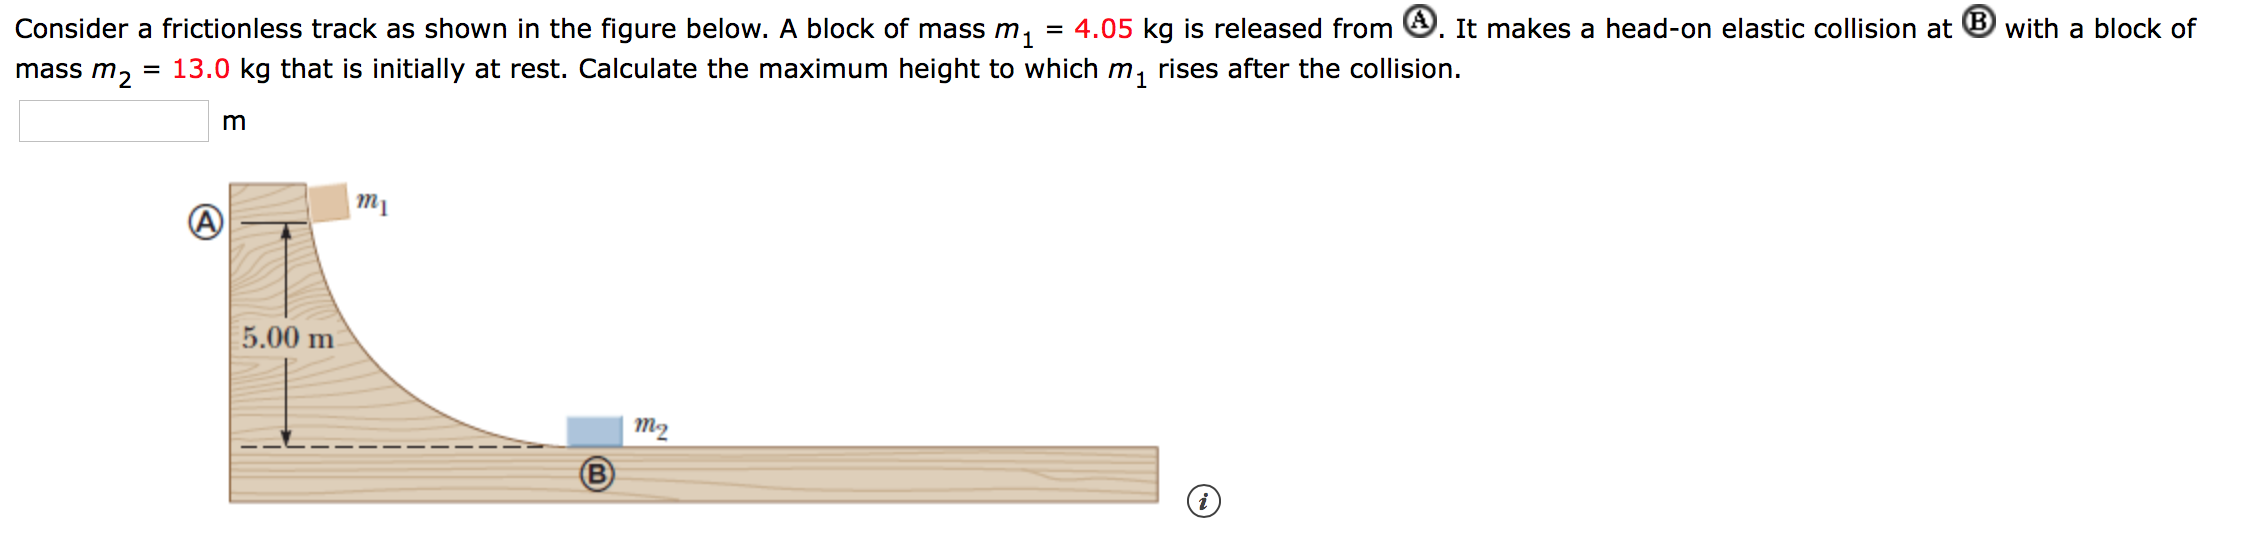 = 4.05 kq is released from . It makes a head-on elastic collision at B with a block of
Consider a frictionless track as shown in the figure below. A block of mass m
13.0 kg that is initially at rest. Calculate the maximum height to which m, rises after the collision
mass m2
m
тy
5.00 m
т2
B
